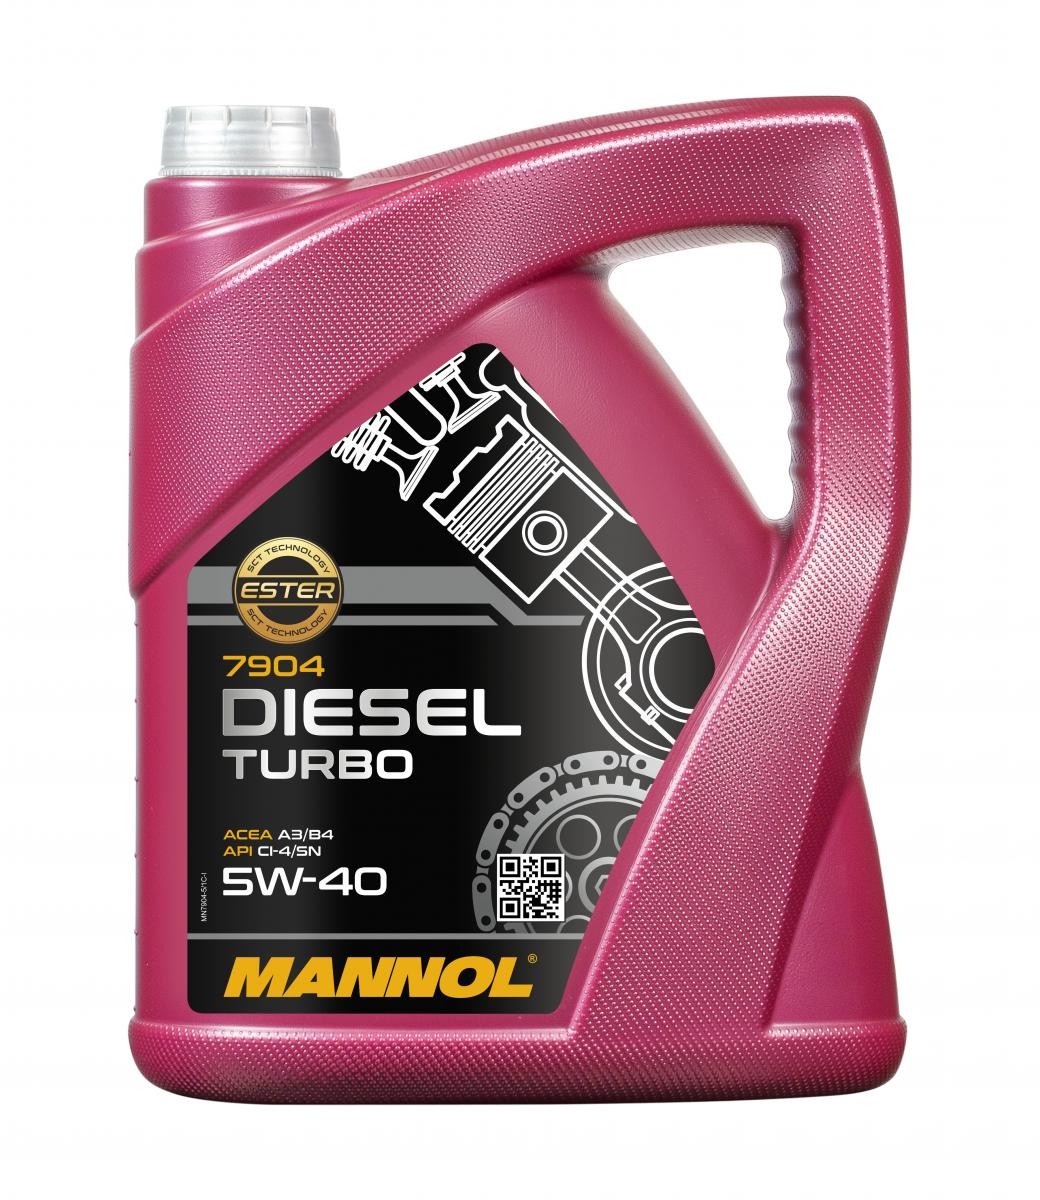 MANNOL EXTREME 5W40 (7915)*5L*ACEA A3/B4* API SN/CH-4* FULLY SYNTHETIC OIL